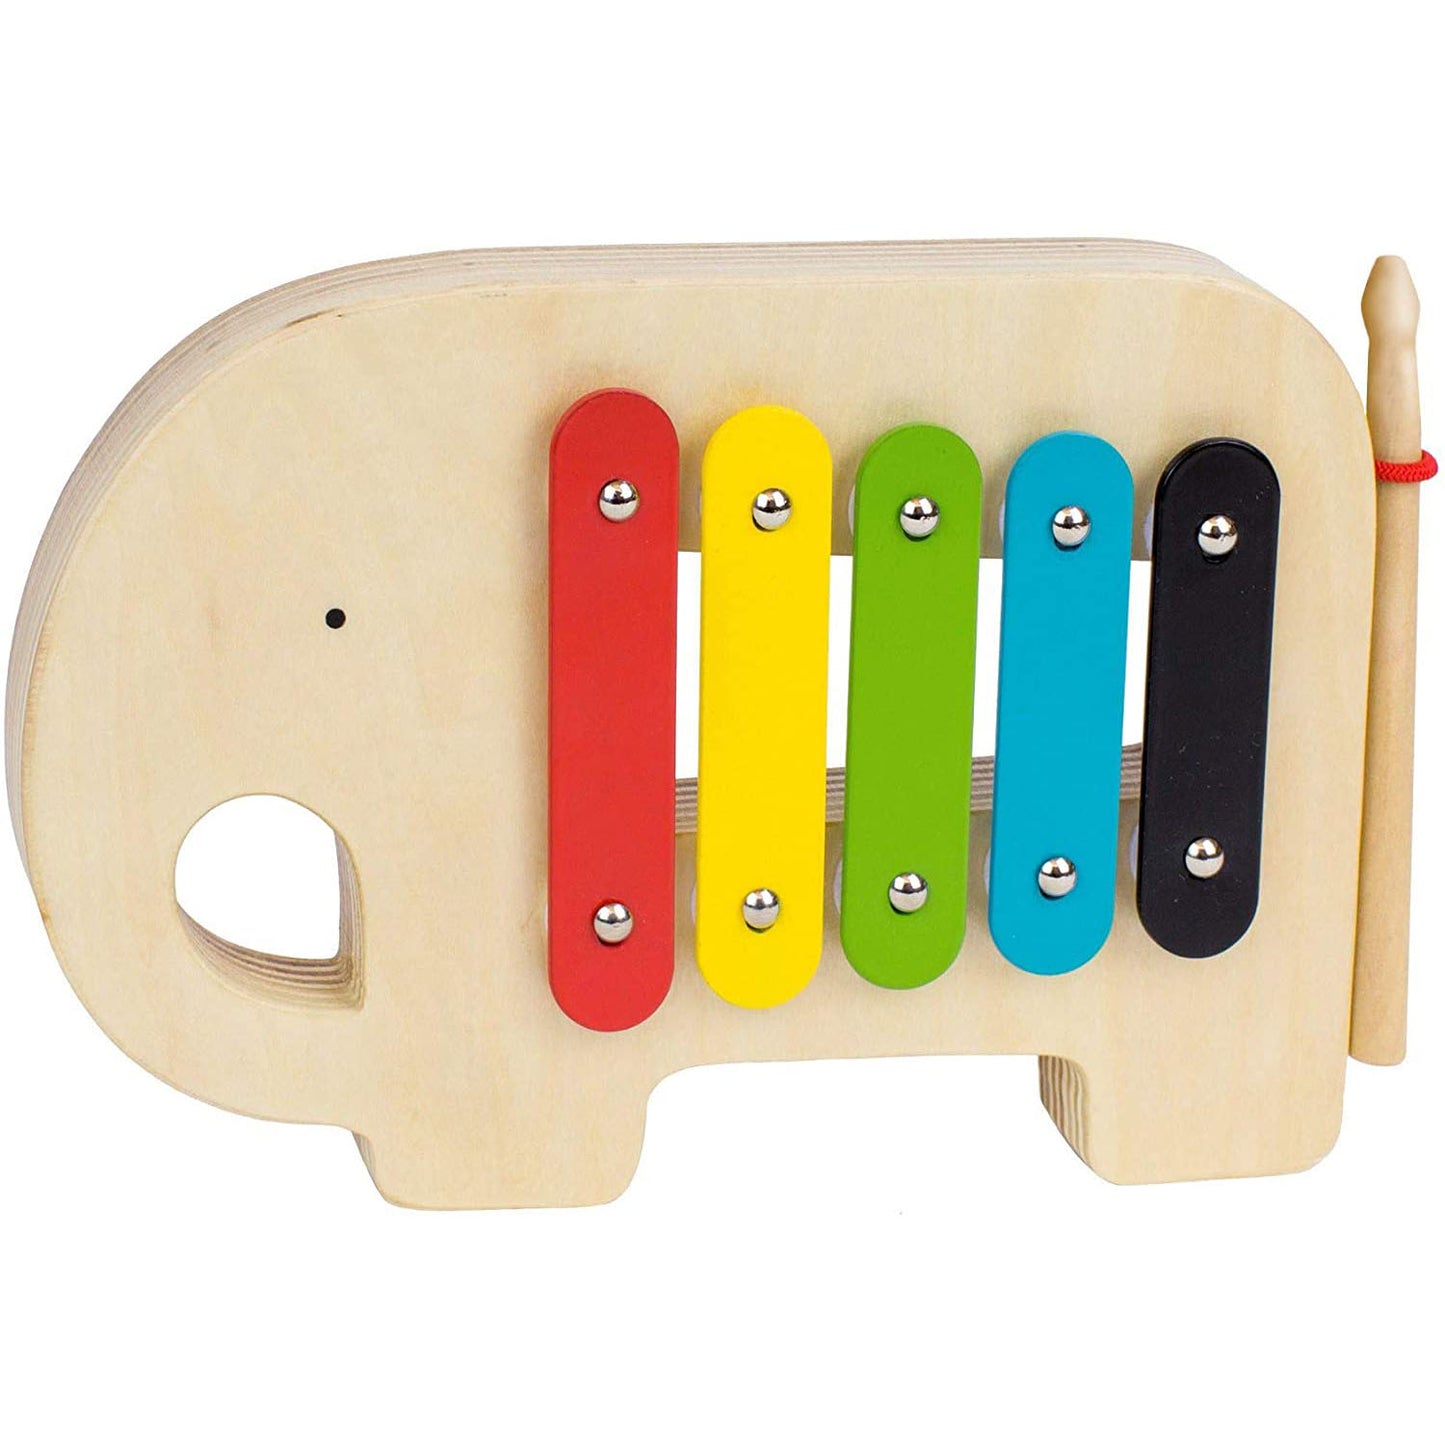 Petit Collage Jumbo Wooden Xylophone Musical Instrument